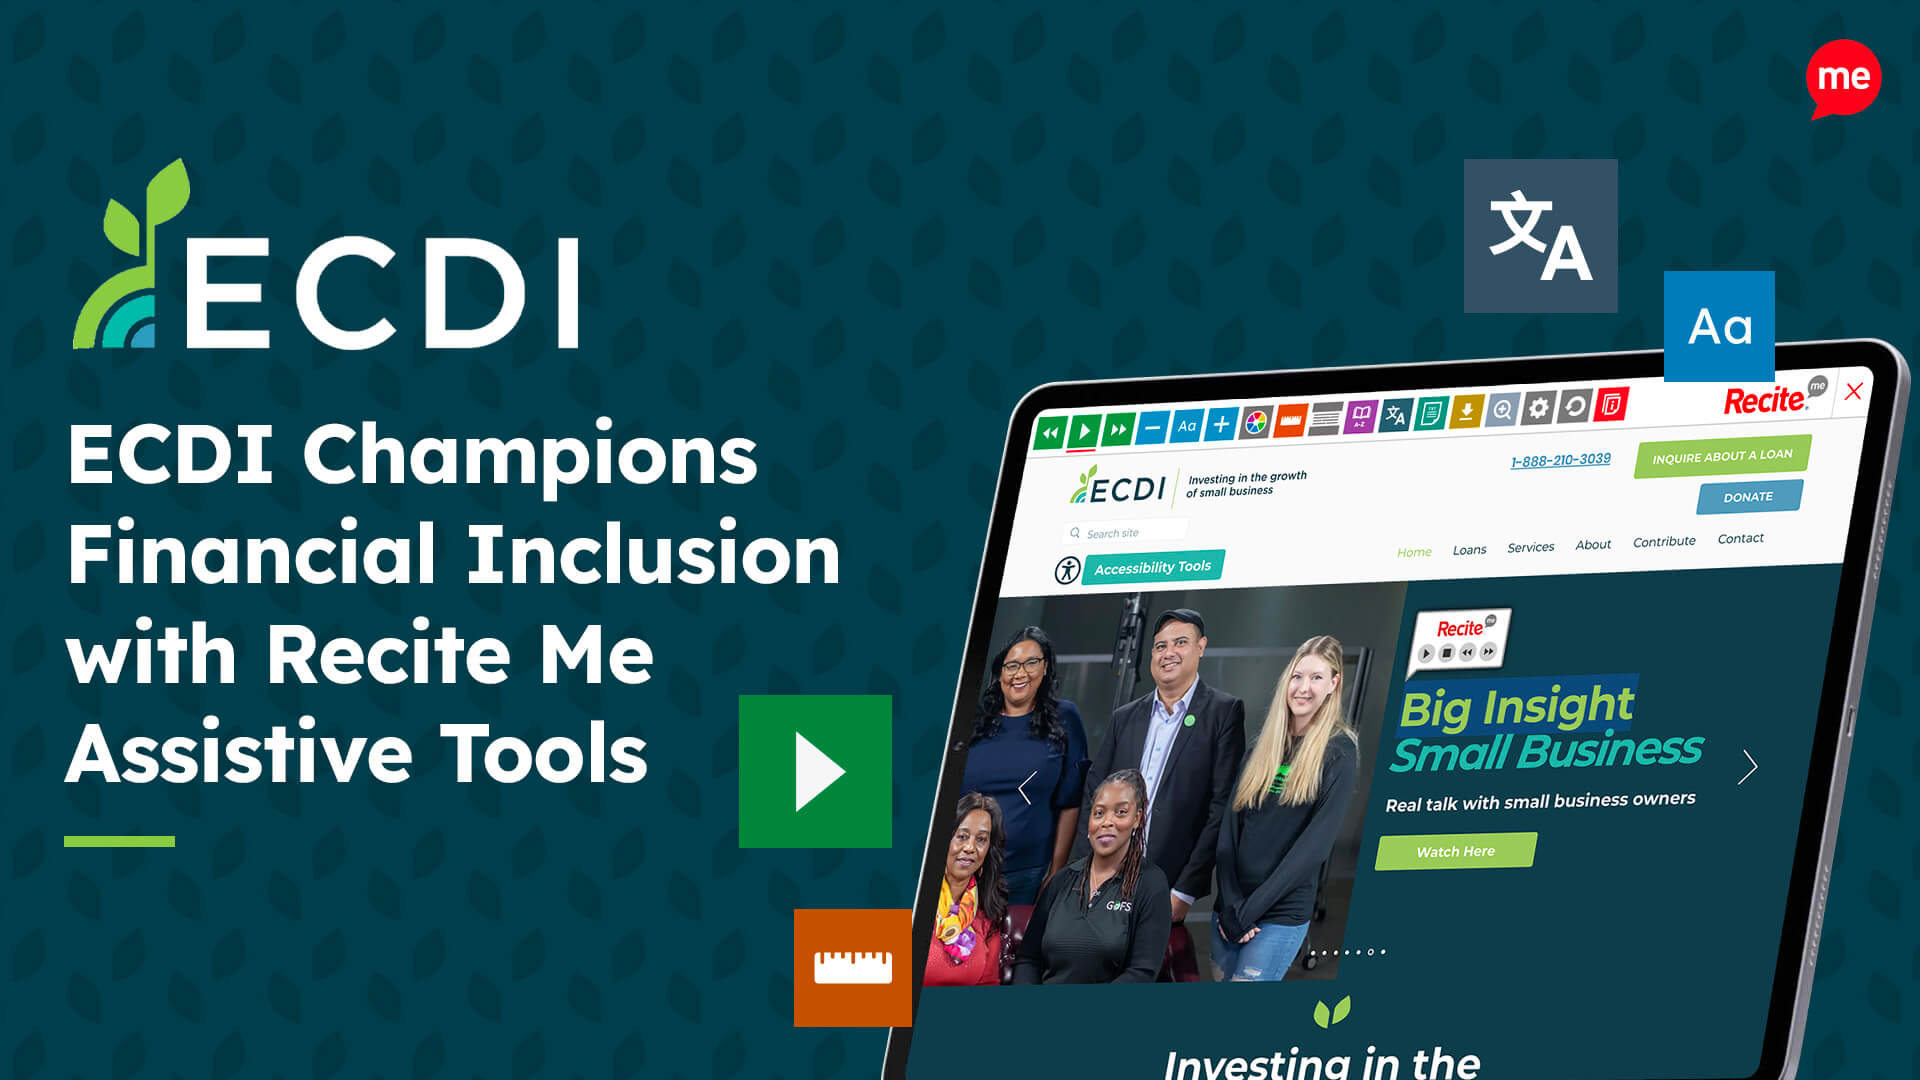 ECDI Champions Financial Inclusion with Recite Me Assistive Tools with screenshot of ECDI website on a laptop